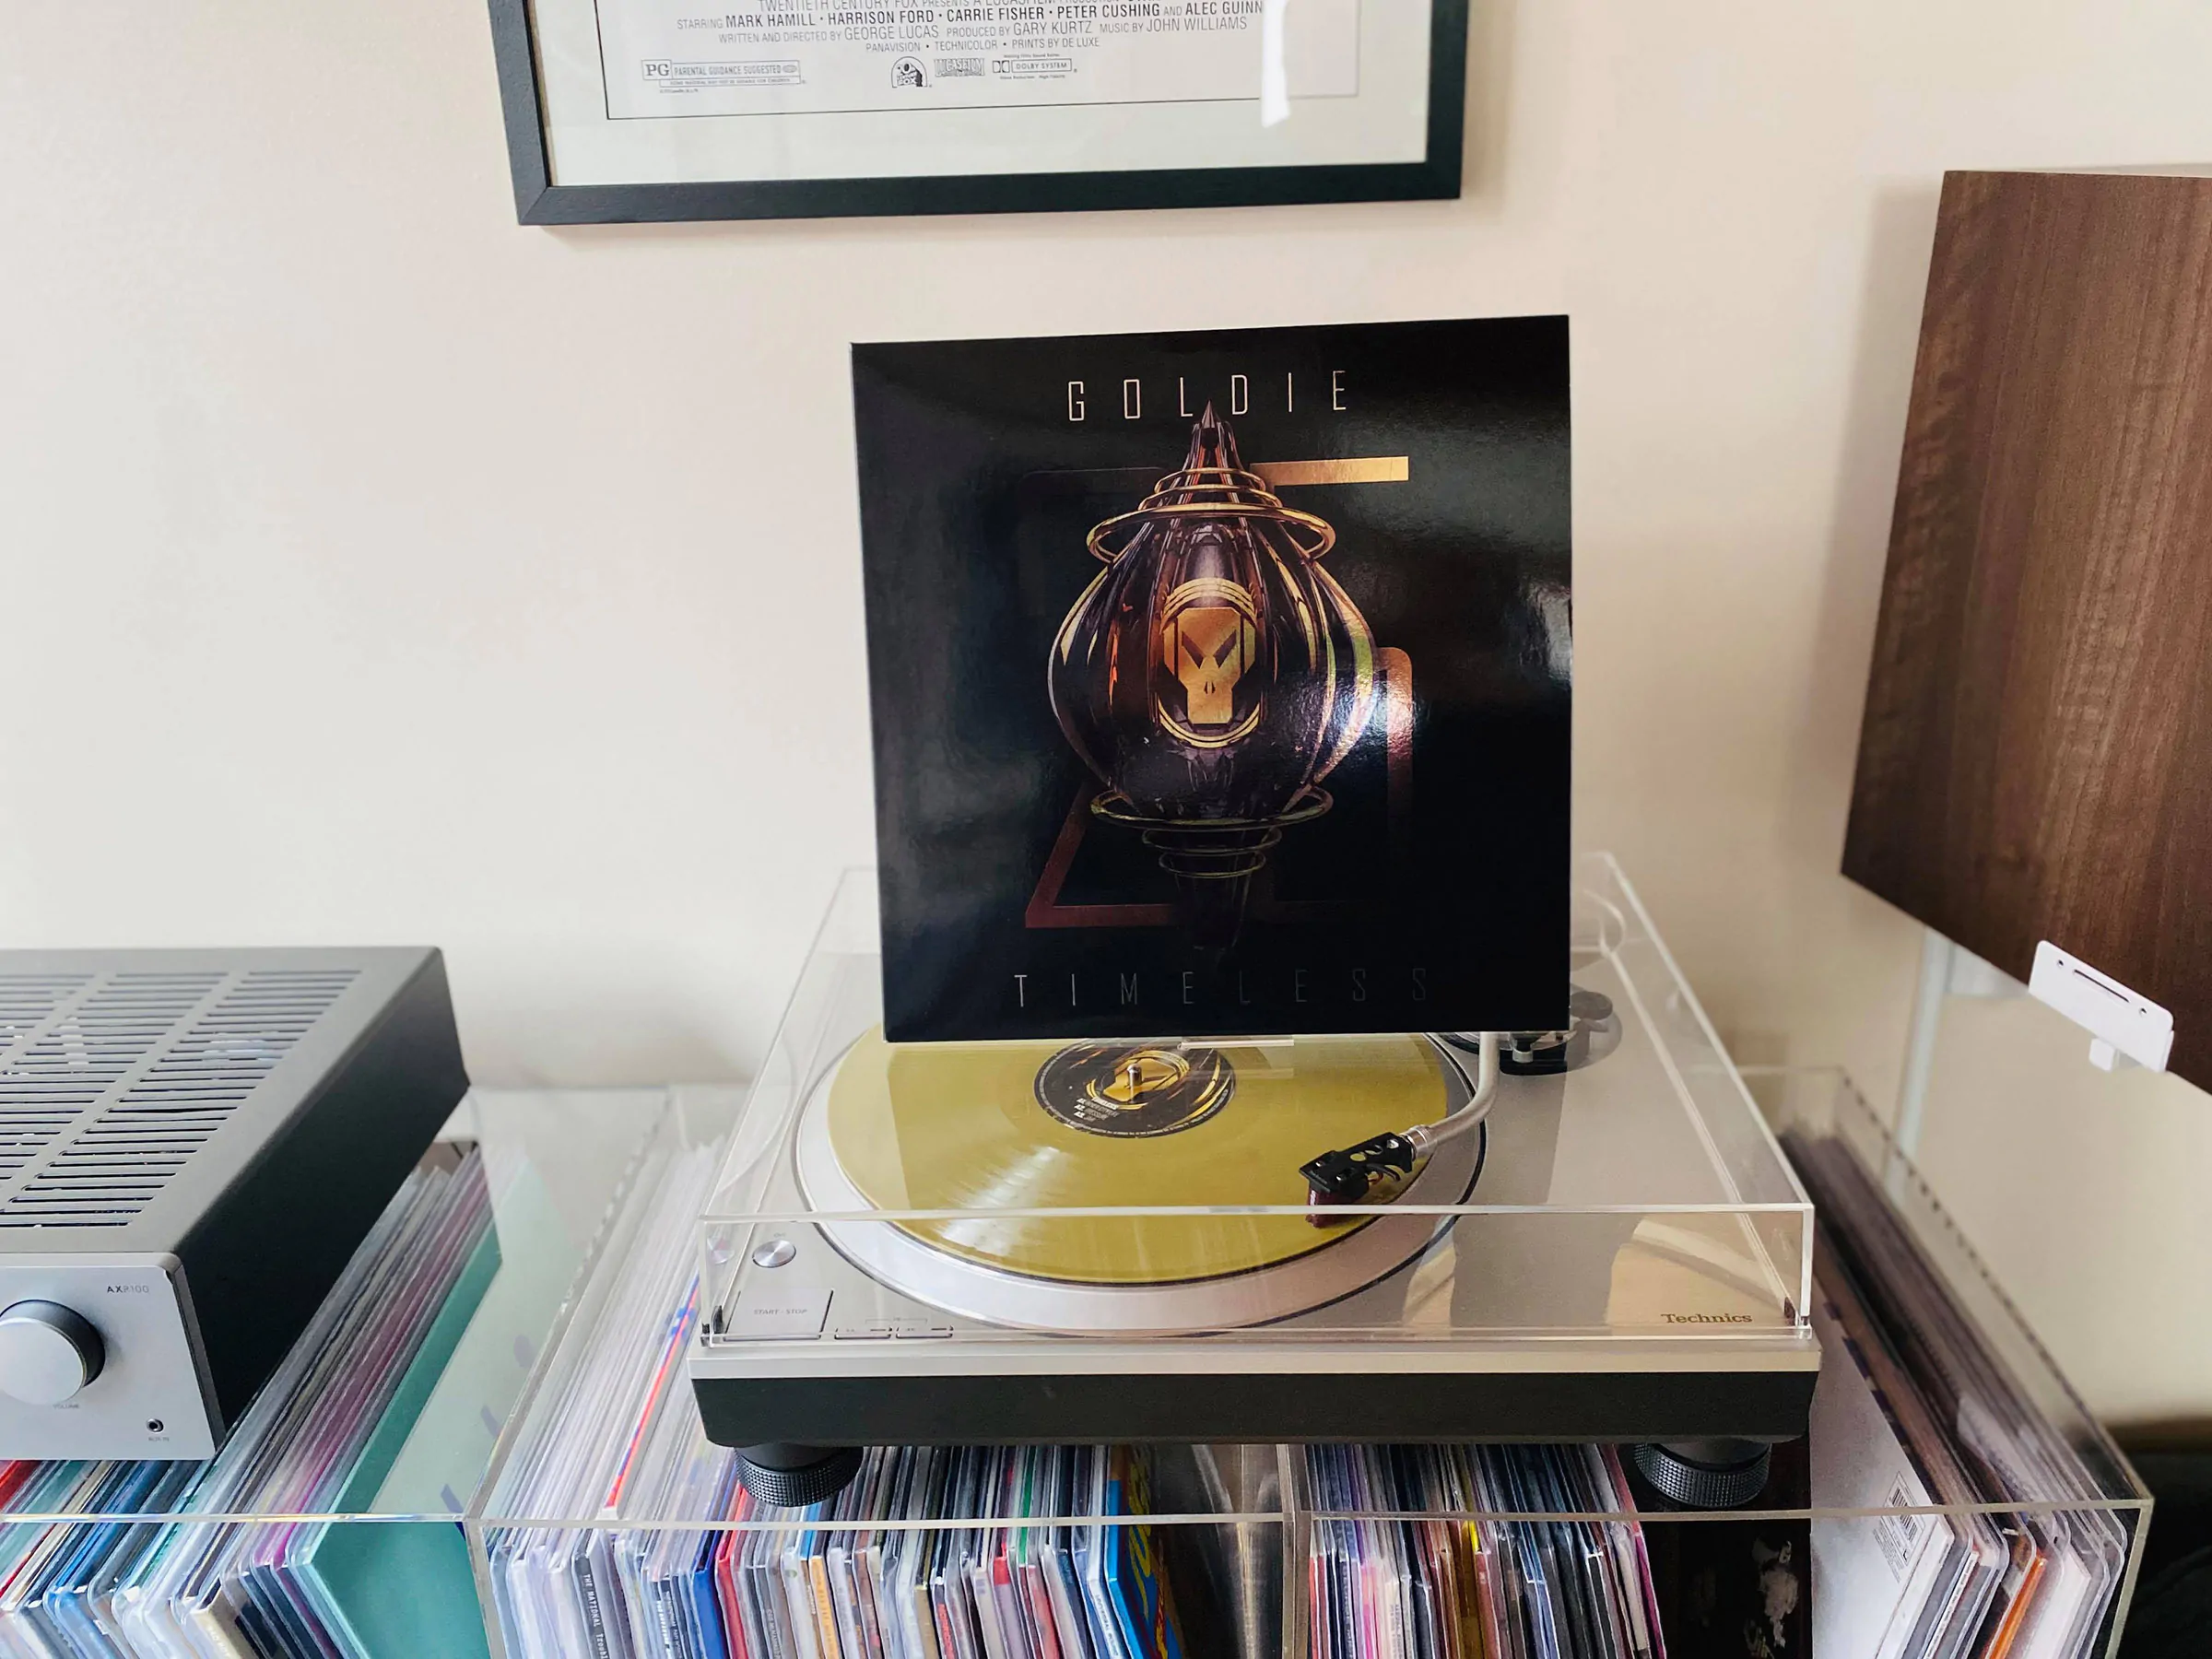 ON THE TURNTABLE: Goldie – Timeless